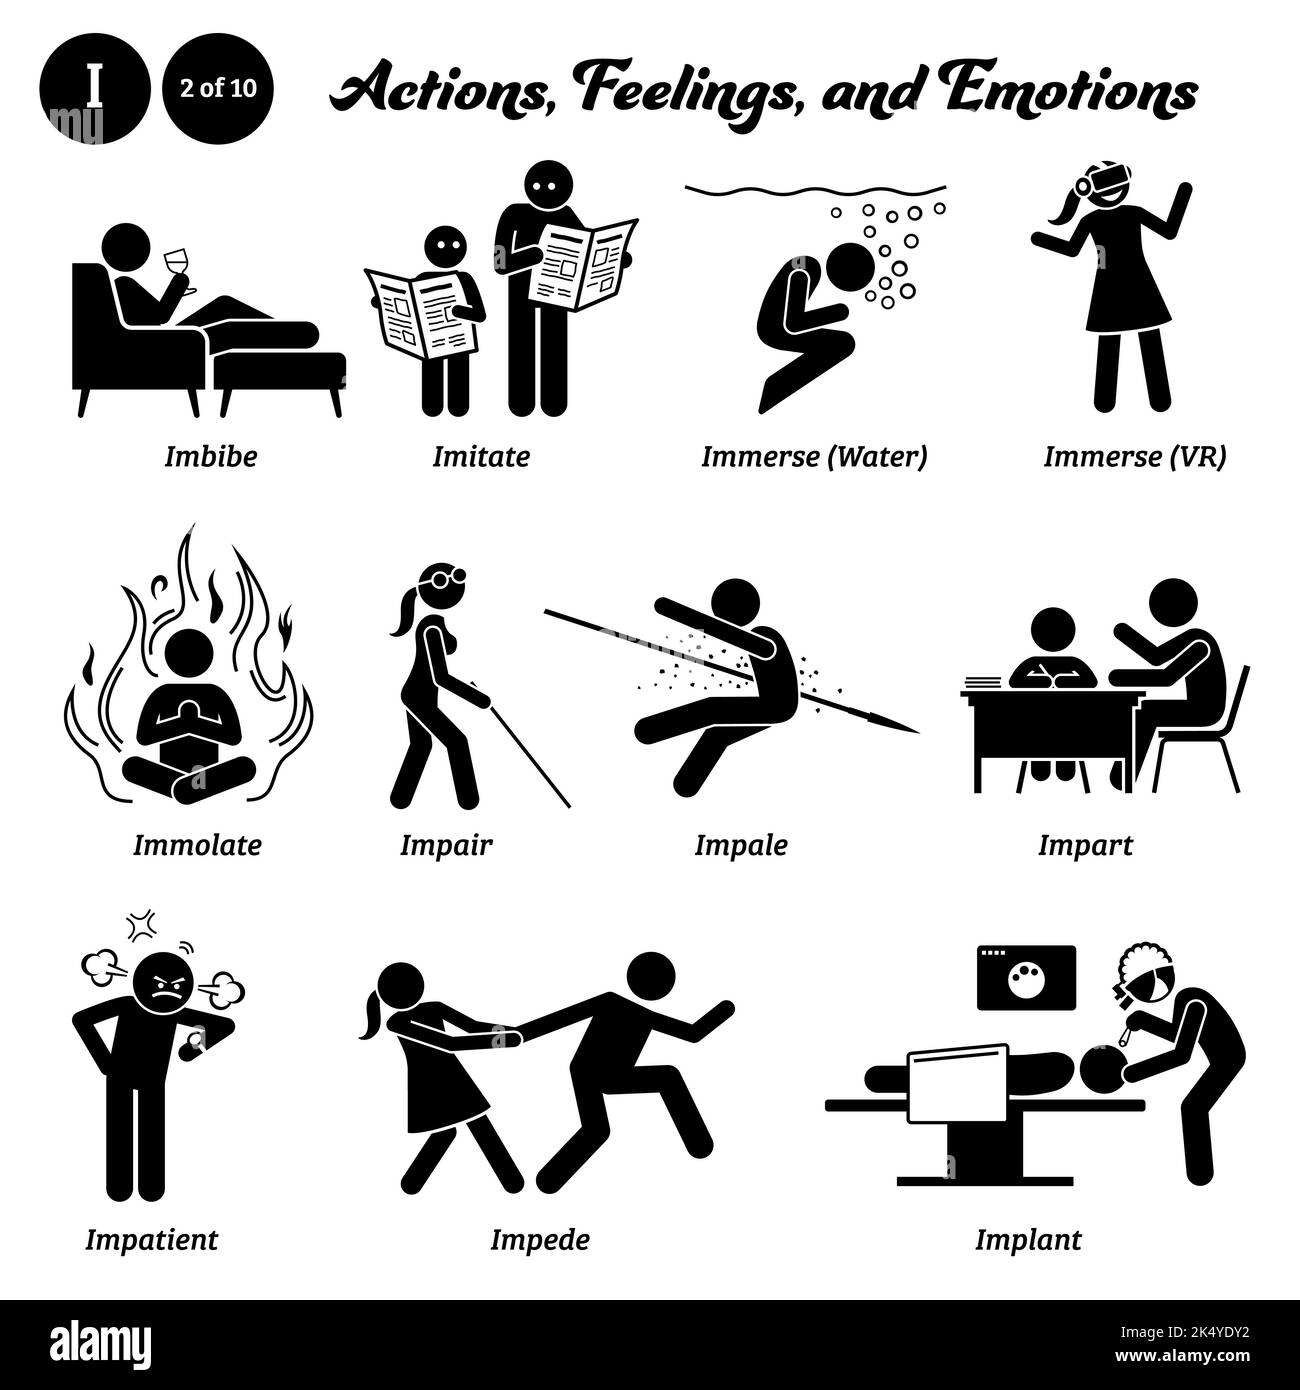 Stick figure human people man action, feelings, and emotions icons alphabet I. Imbibe, imitate, immerse water, immerse VR, immolate, impair, impale, i Stock Vector